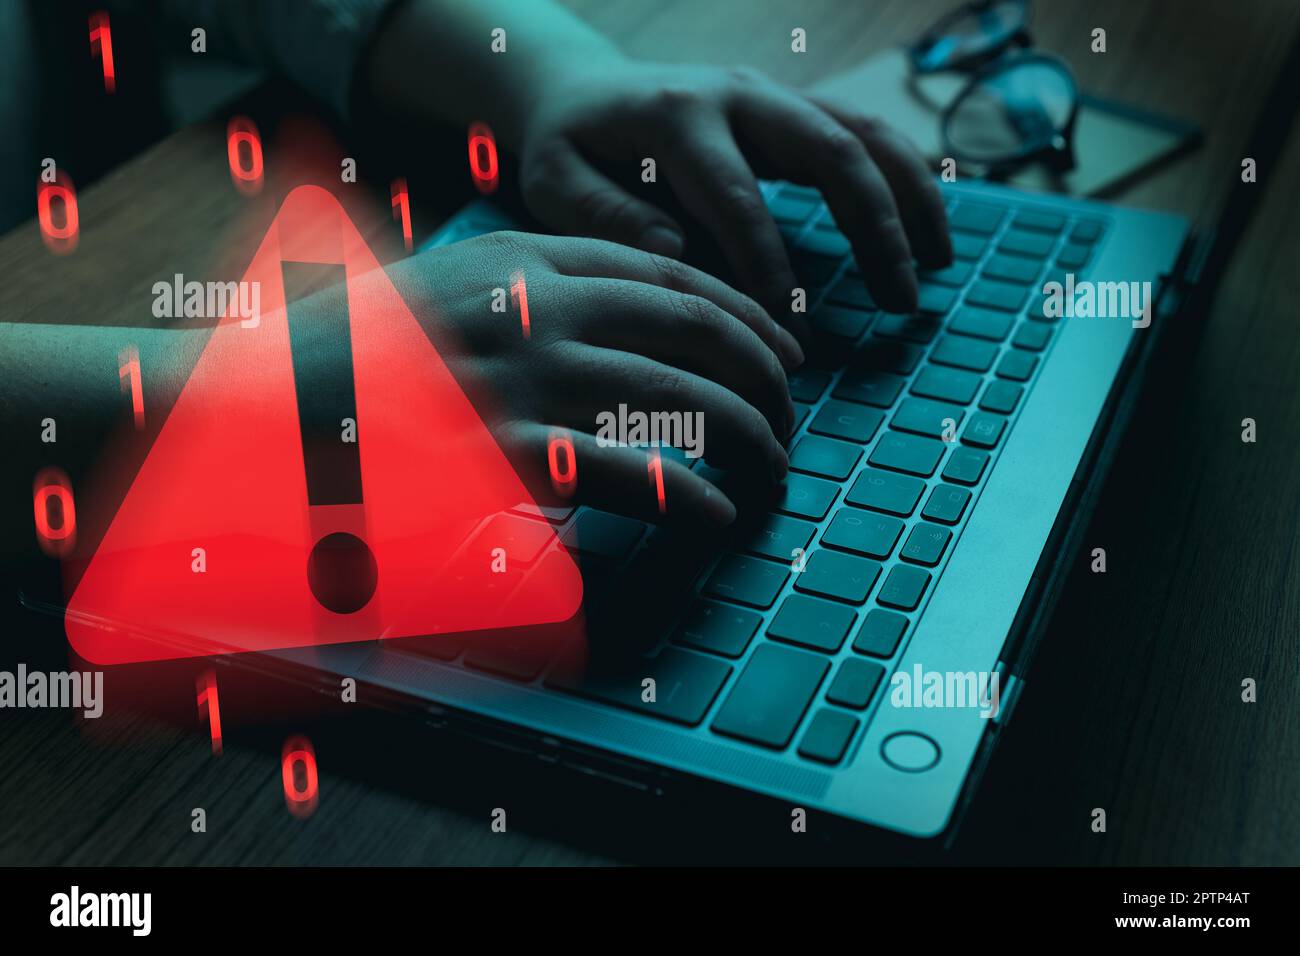 Woman solving cyber attacks on laptop. Compromised information concept. Malicious software, virus, cybercrime attacks. Warning alert about hacker. Stock Photo